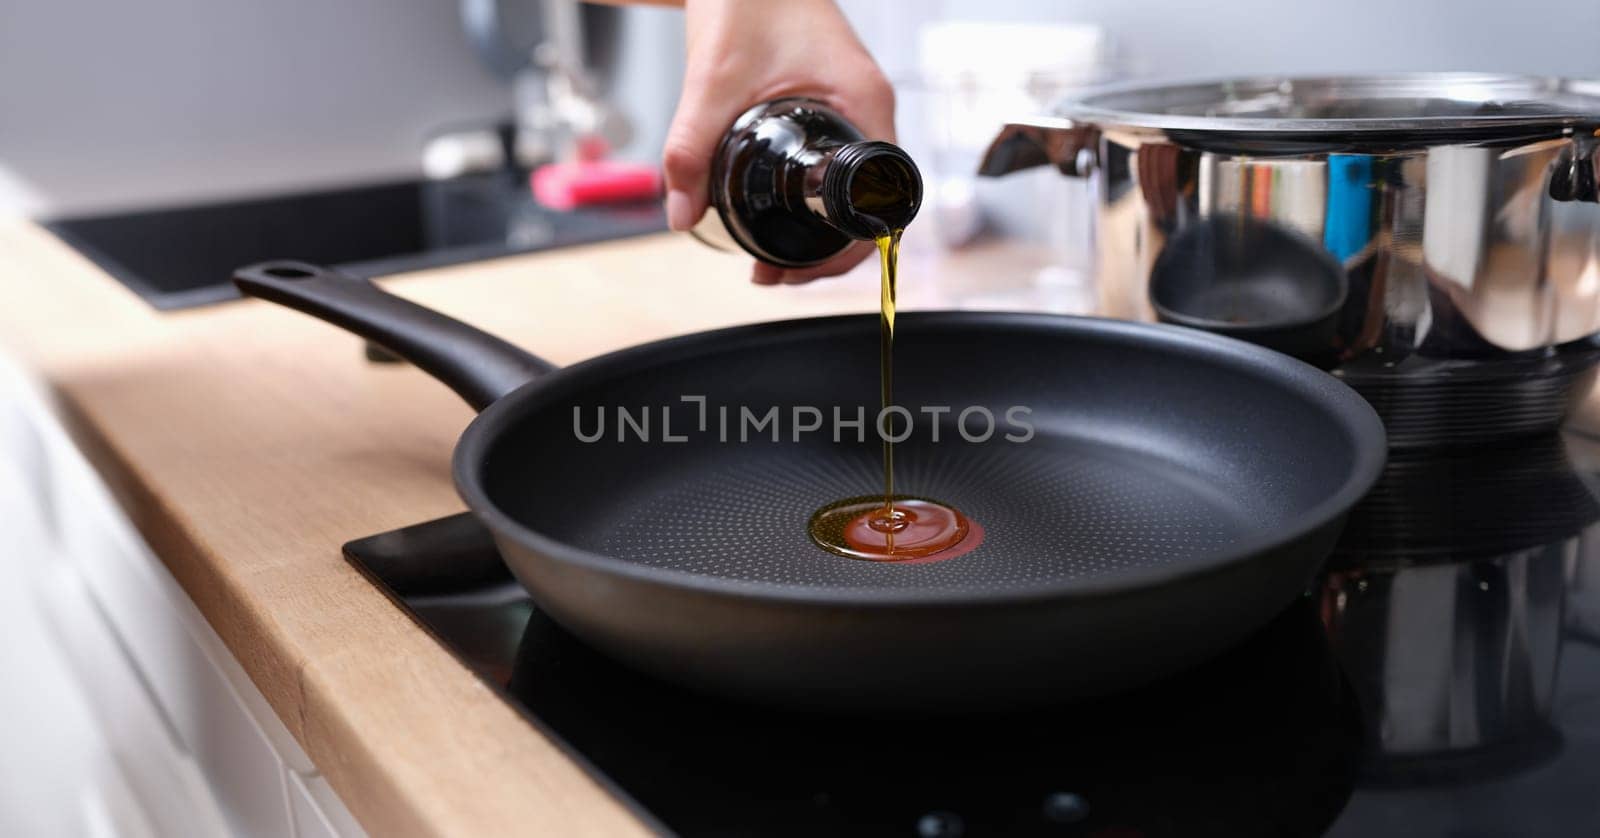 Chef pouring olive oil into frying pan in kitchen closeup by kuprevich